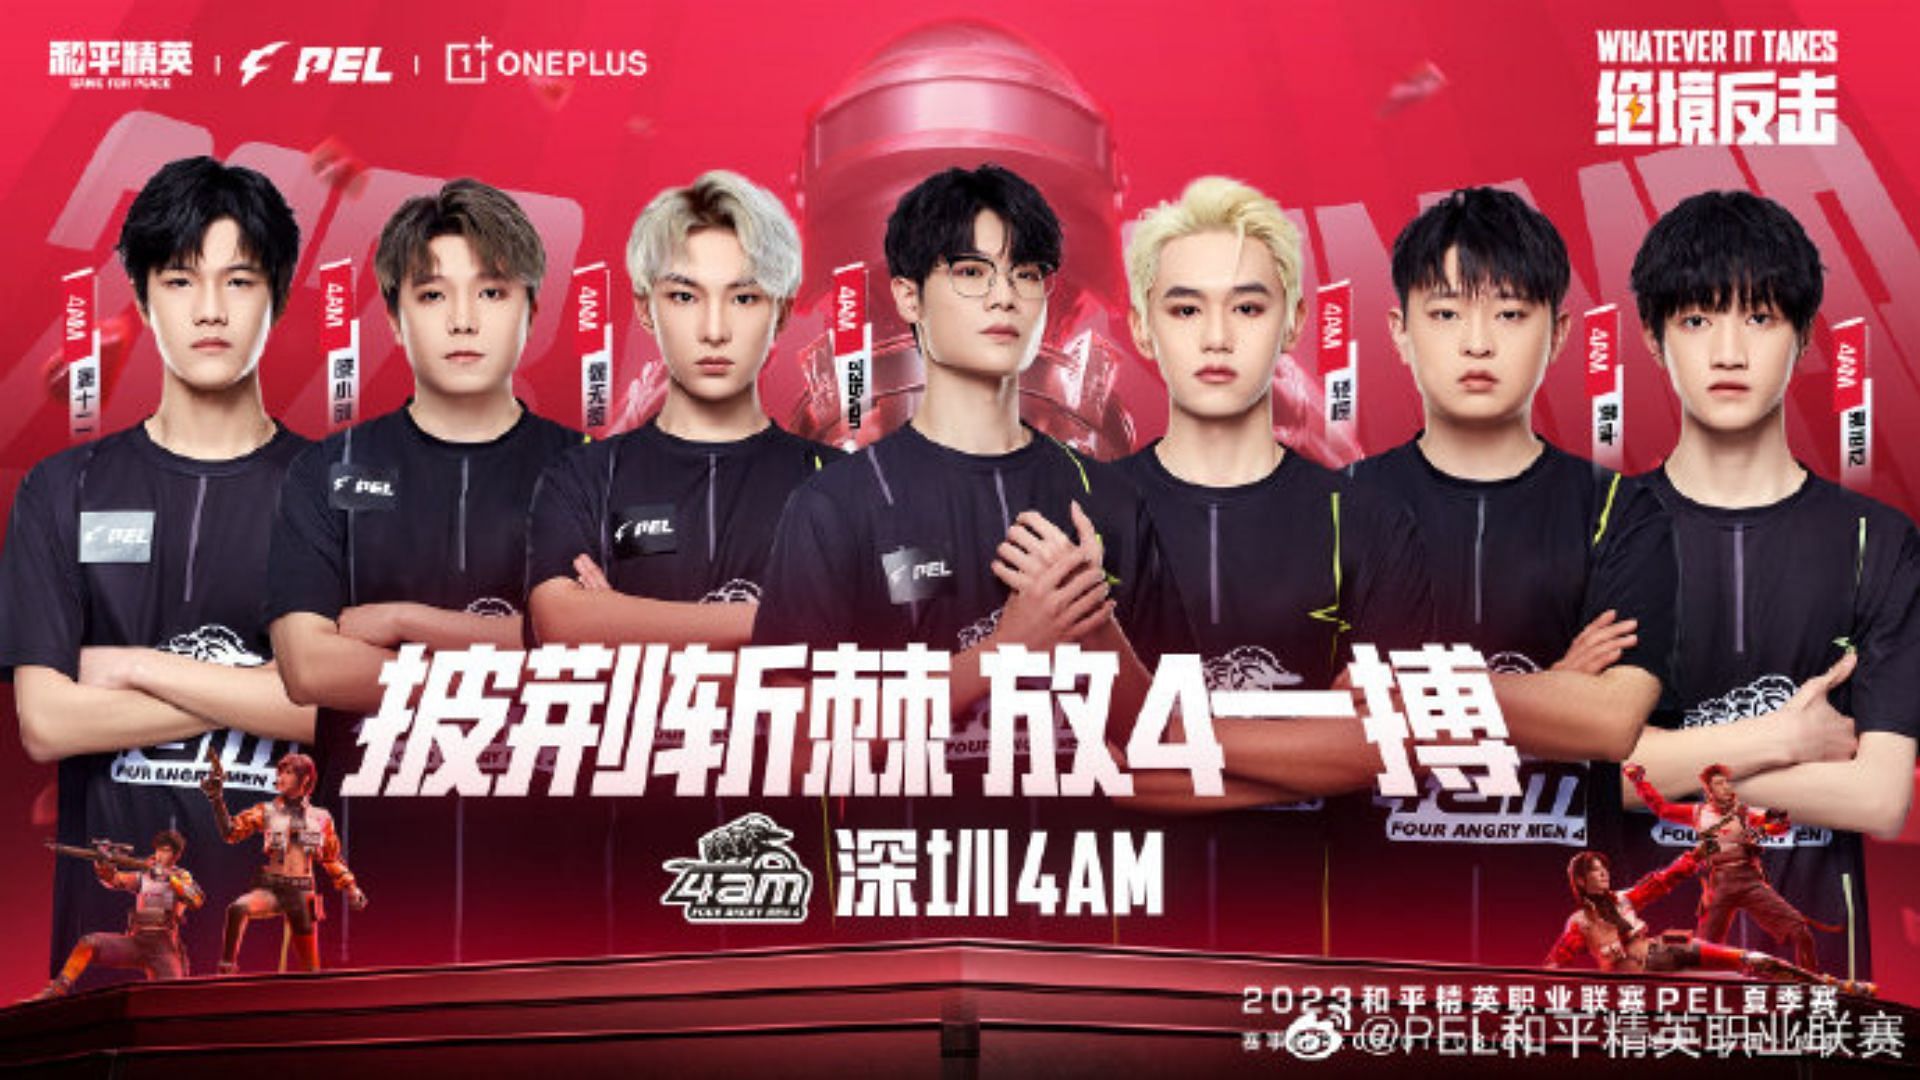 4AM lineup for Peace Keeper Elite Summer 2023 (Image via Tencent)